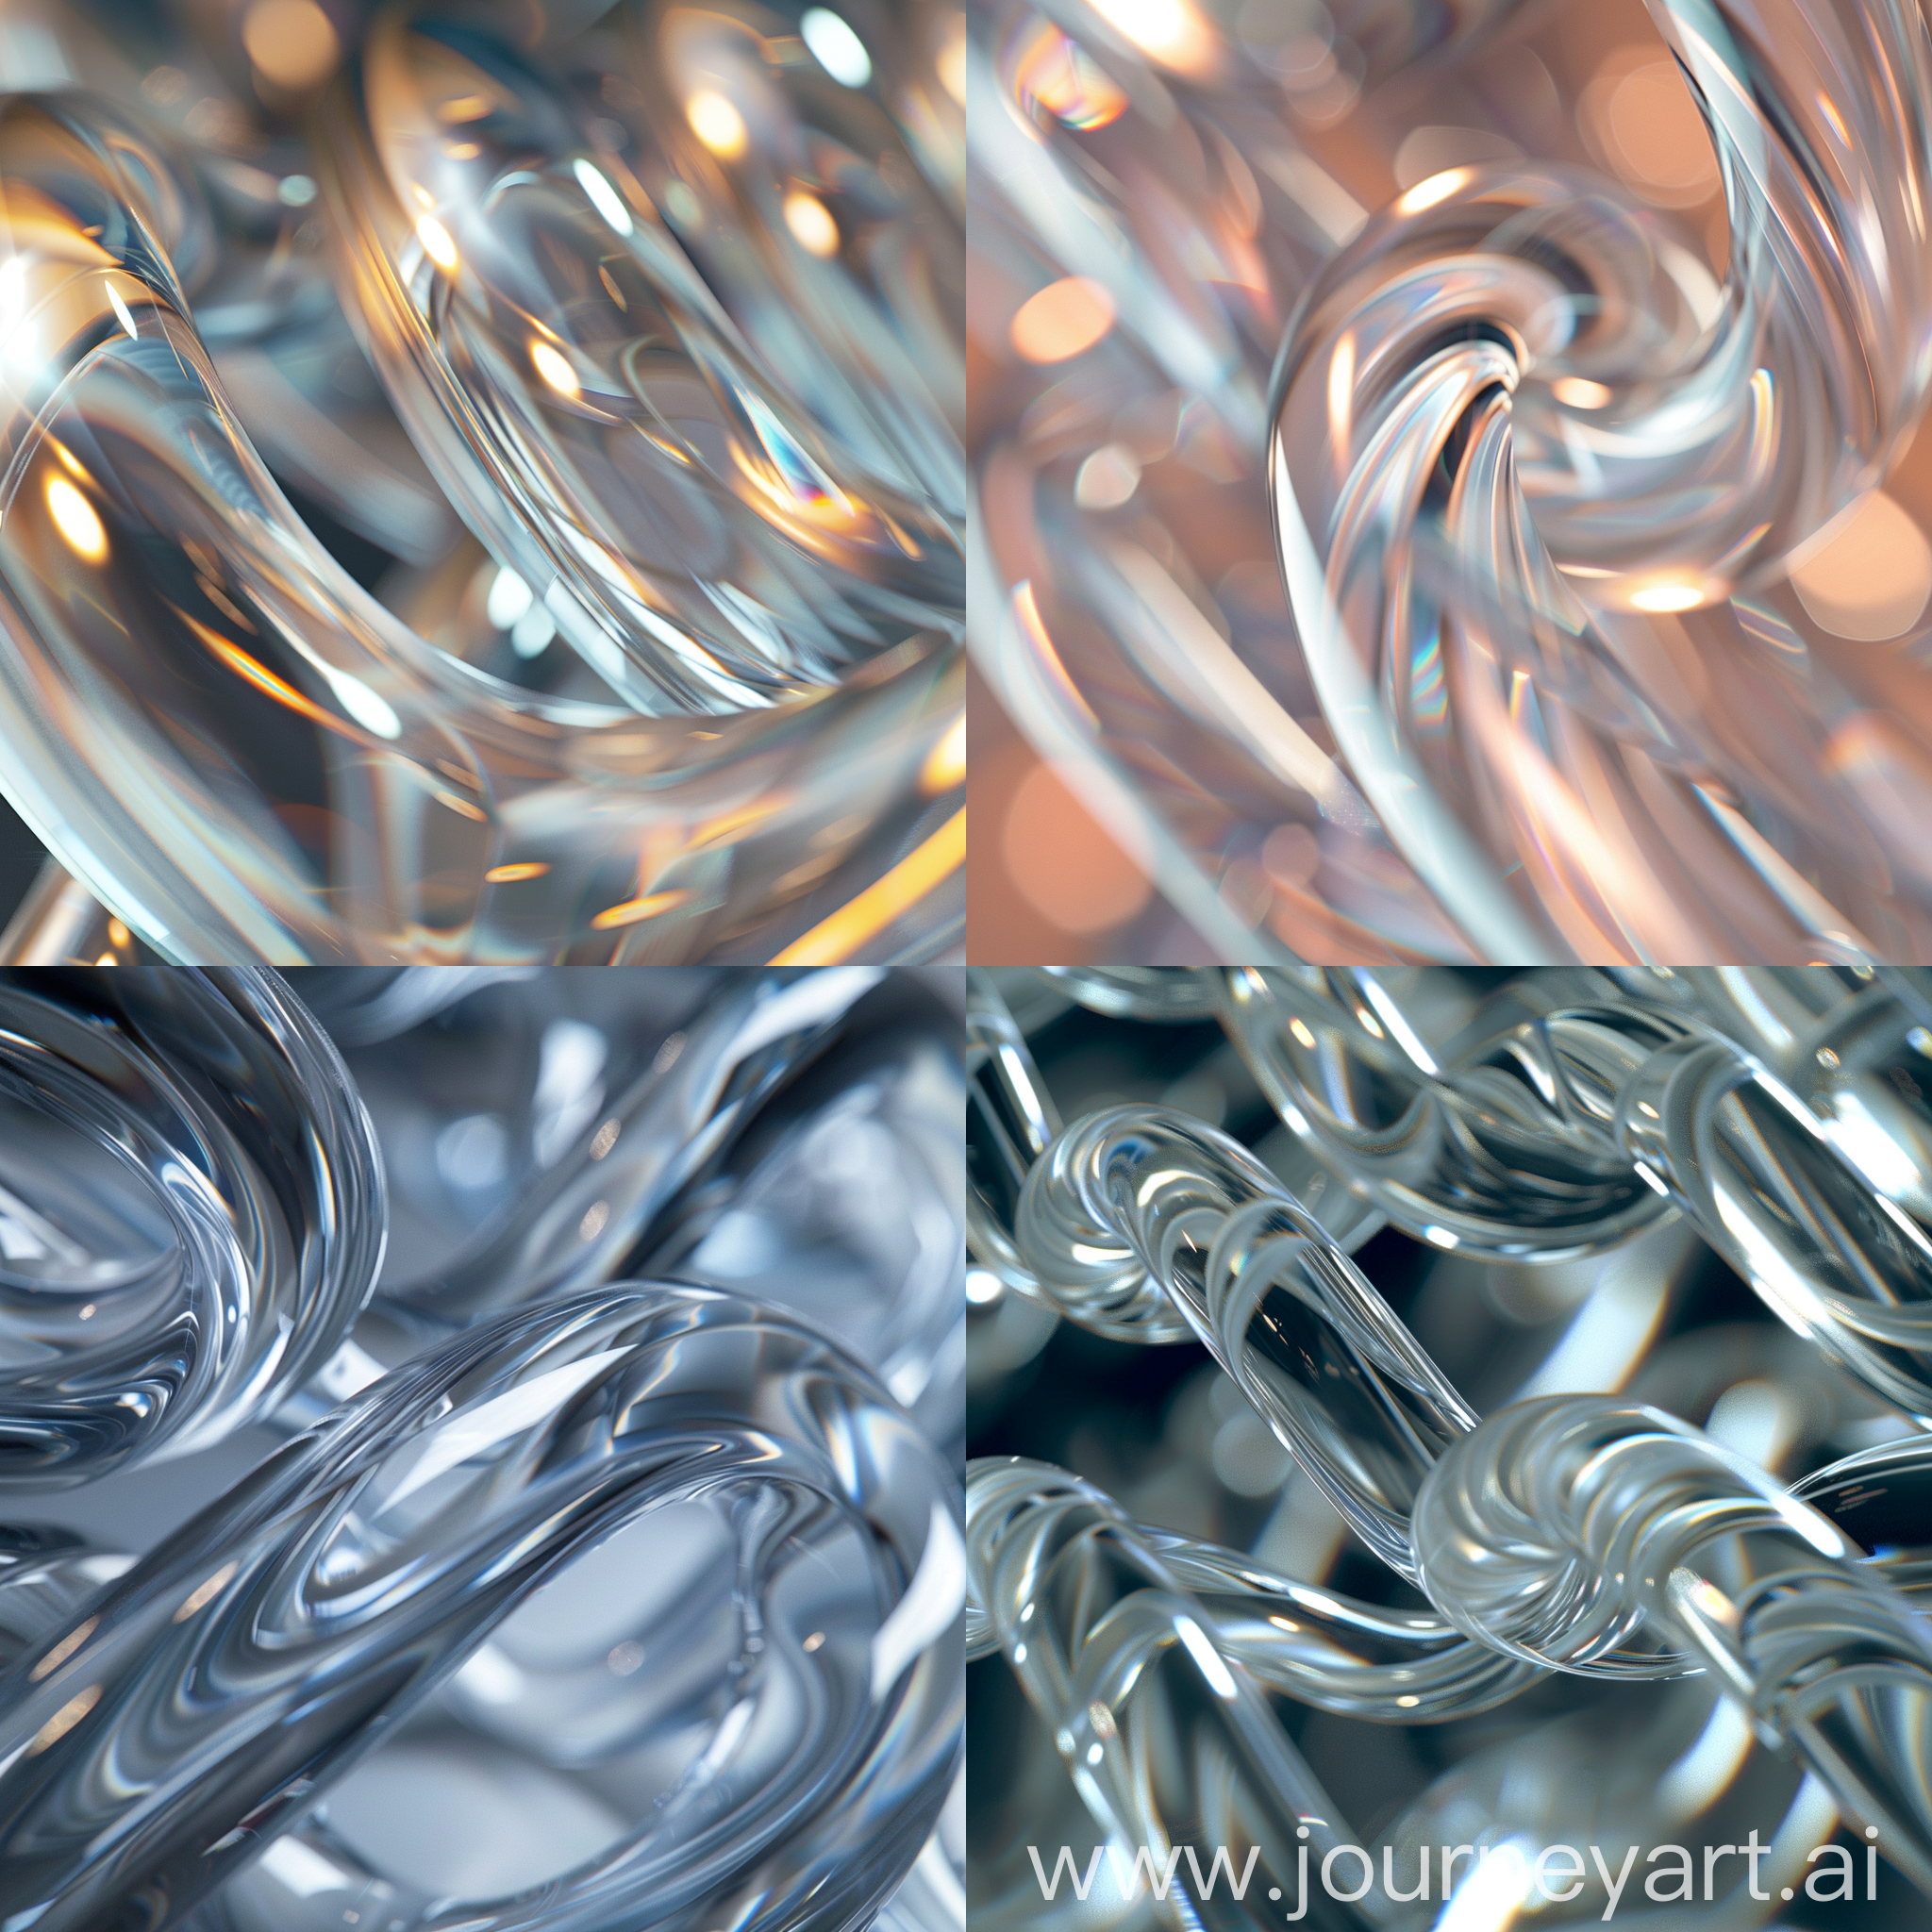 glass like 3d twisted curved tubes closeup with focus blur. high quality wallpaper. With visible beutifu caustics. macro photography.